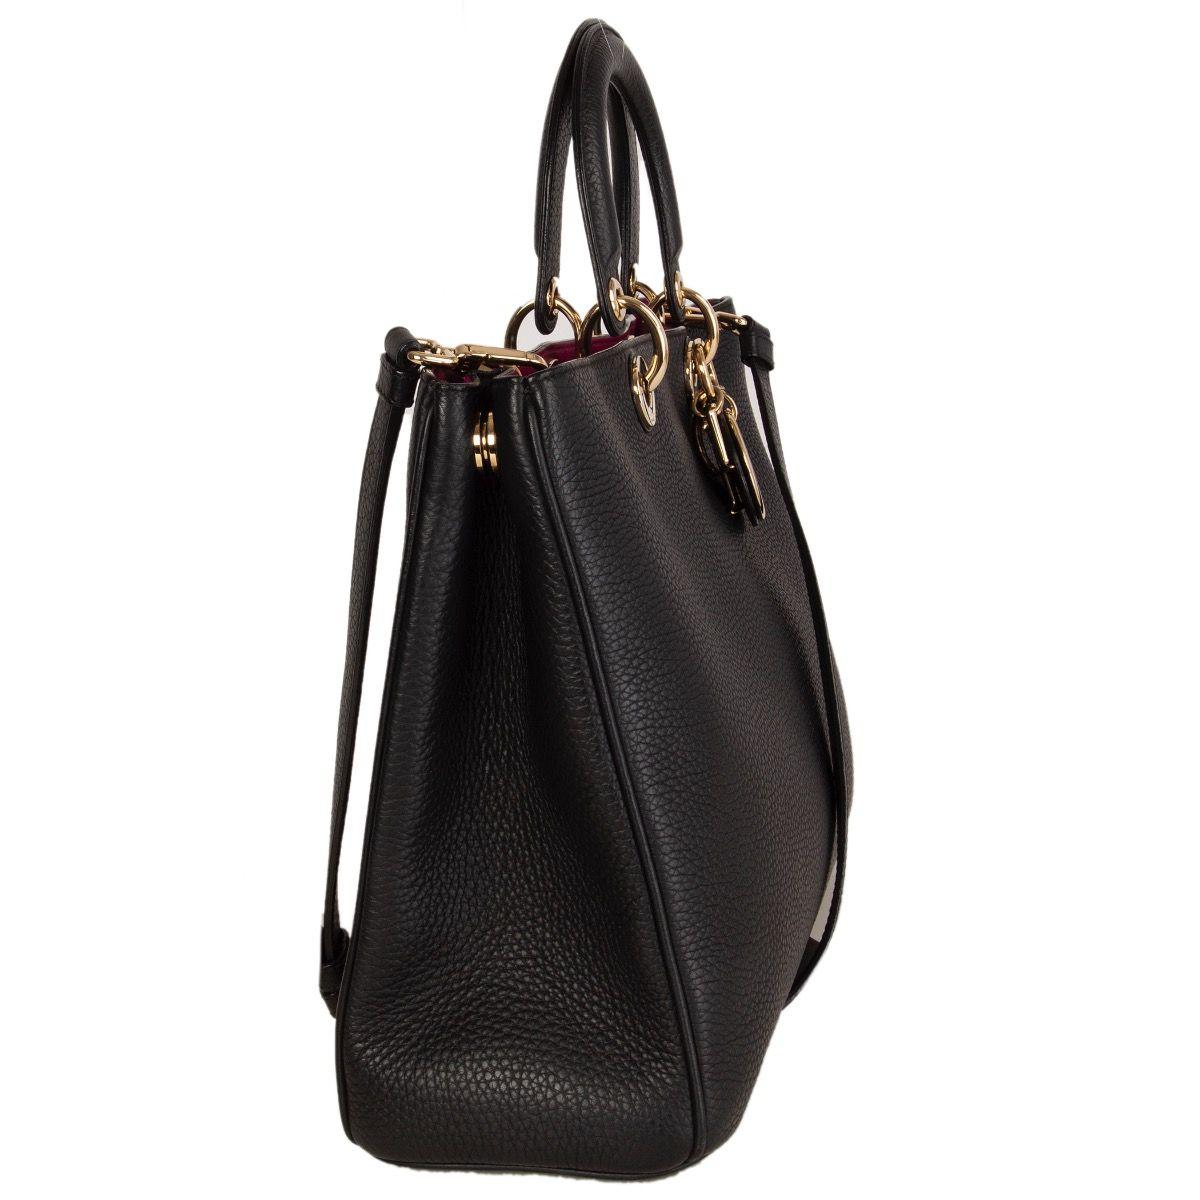 Christian Dior 'Diorissimo' tote shoulder bag in black grained calfskin featuring light gold-tone hardware. Opens with a magnetic button on top and is lined in fuchsia calfskin with two open pockets against the back with a detachable black grained